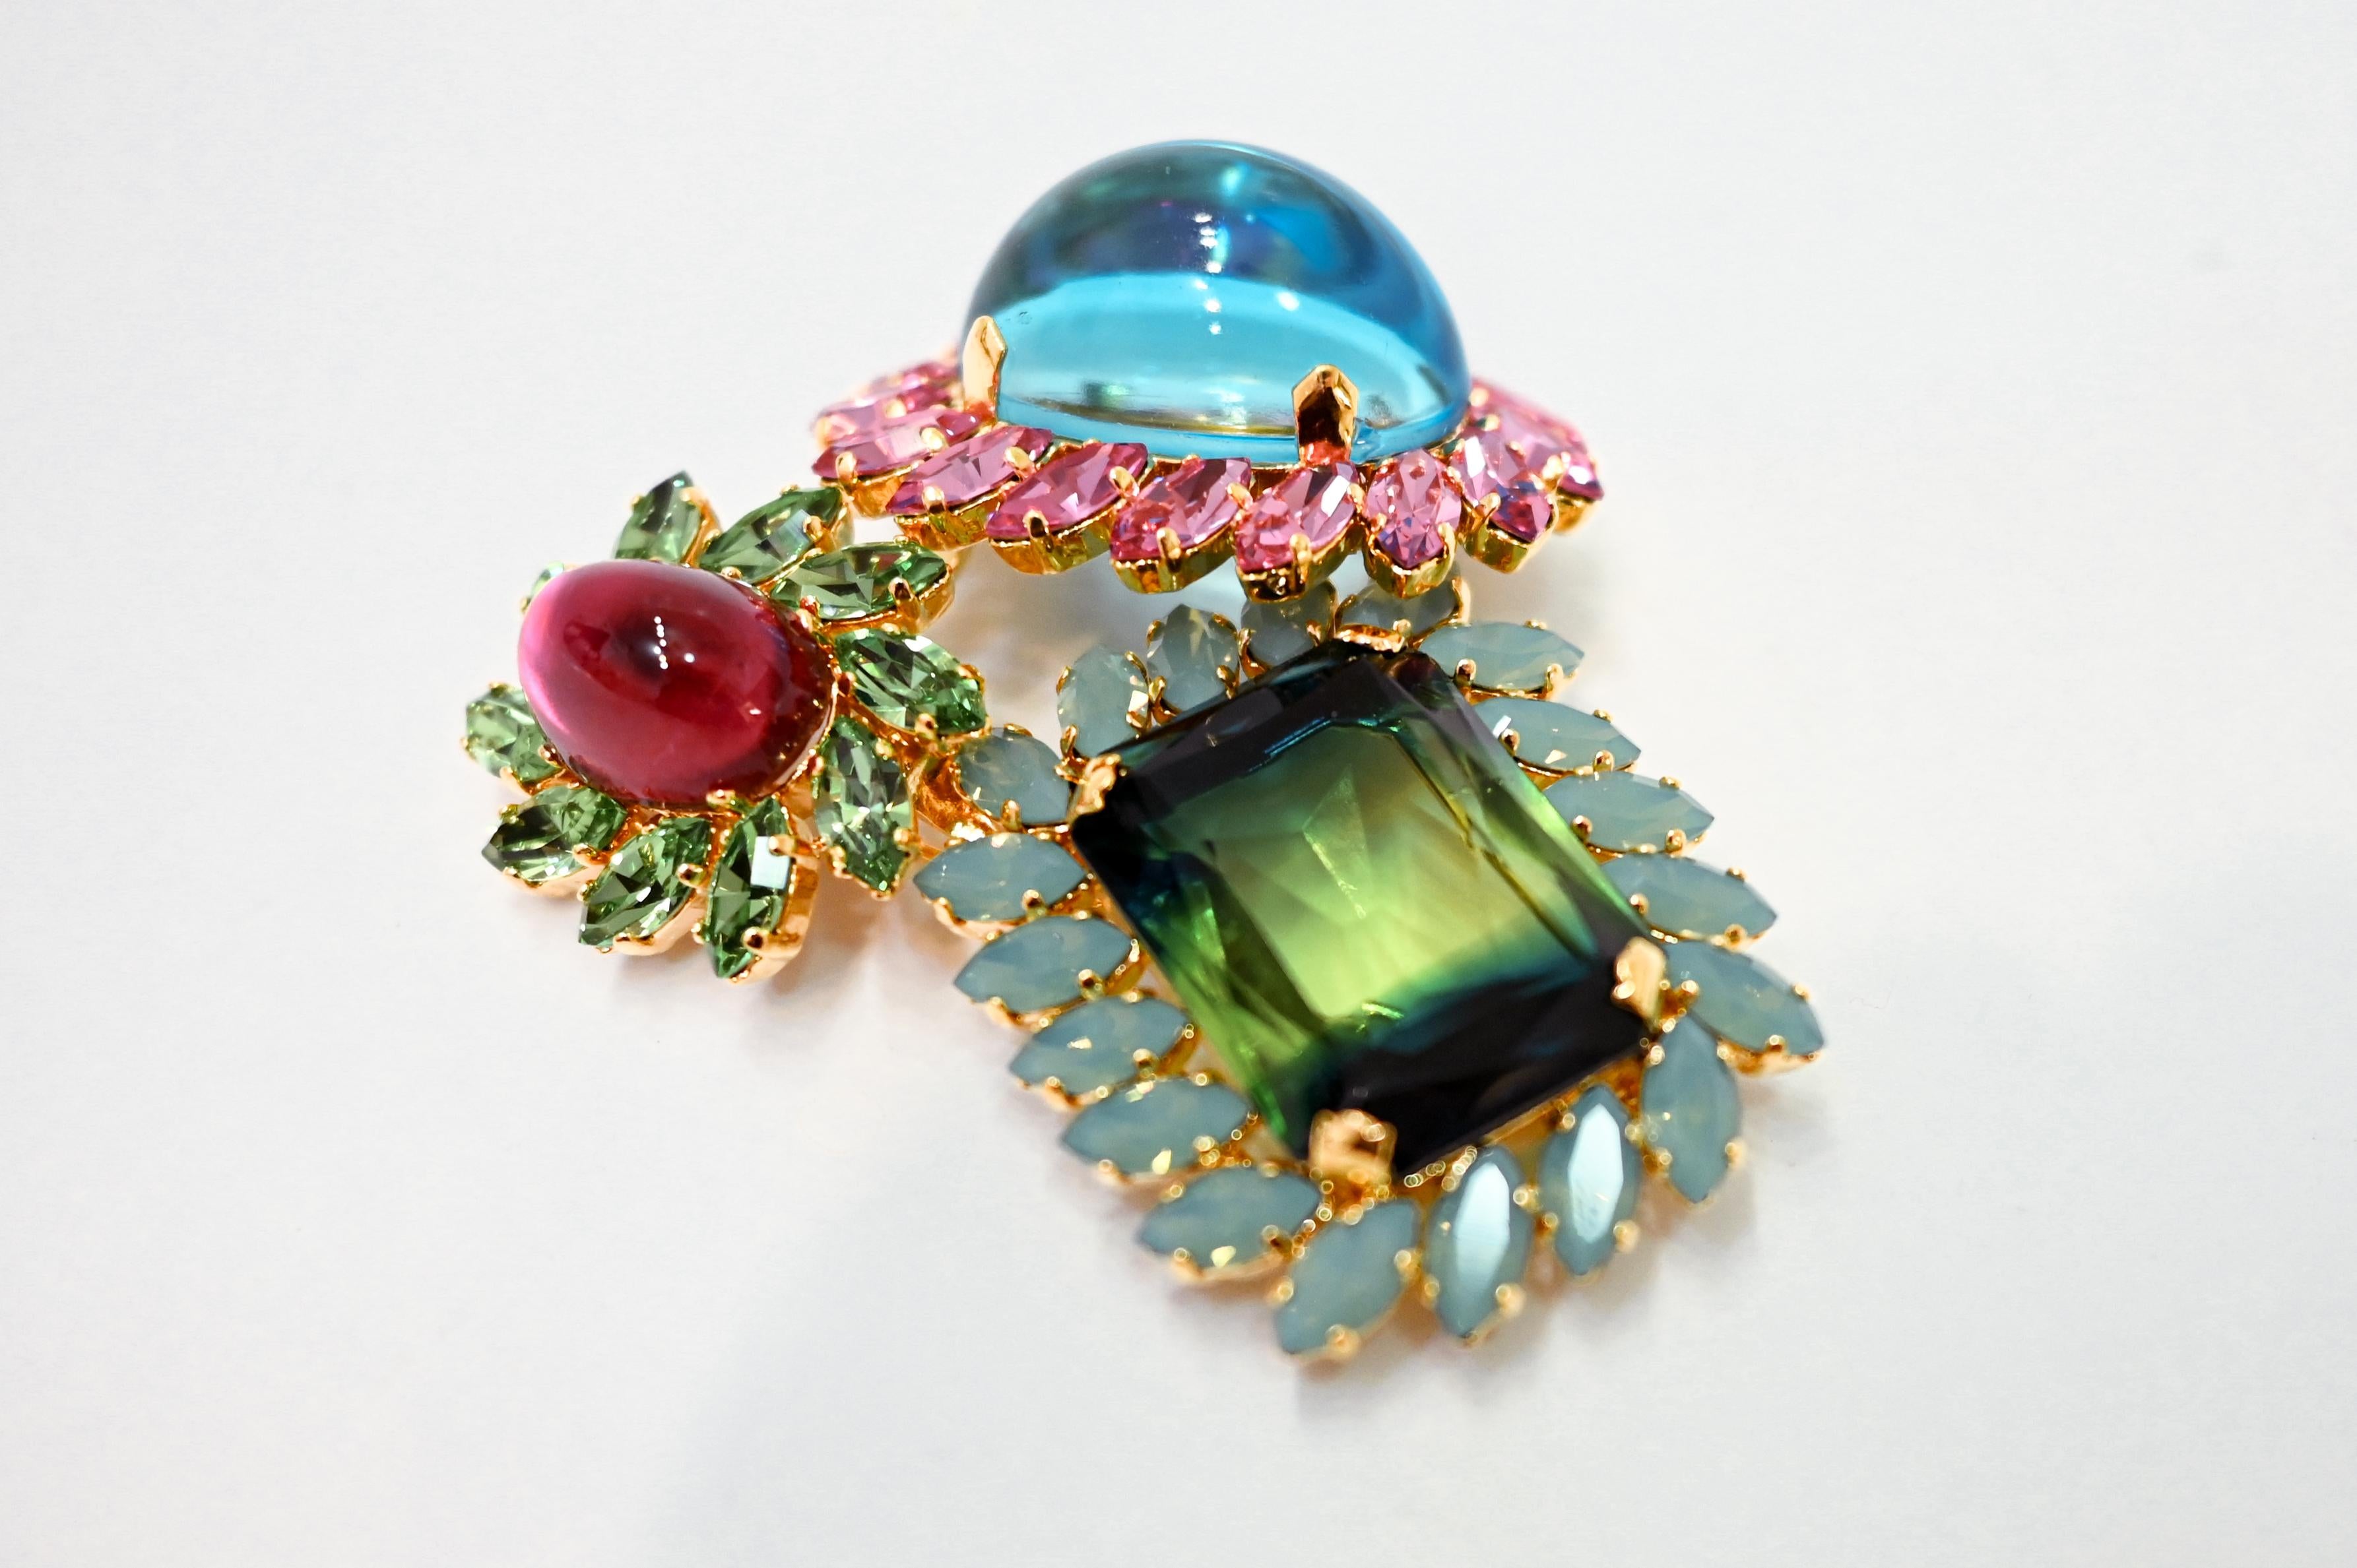 Candy colors Swarovski Crystal brooch. 1 of 2 especially for isabelle K Jewelry made in Philippe Ferrandis atelier in Paris.
Philippe Ferrandis has been a parurier in Paris since 1986. He creates two collections a year, always different and